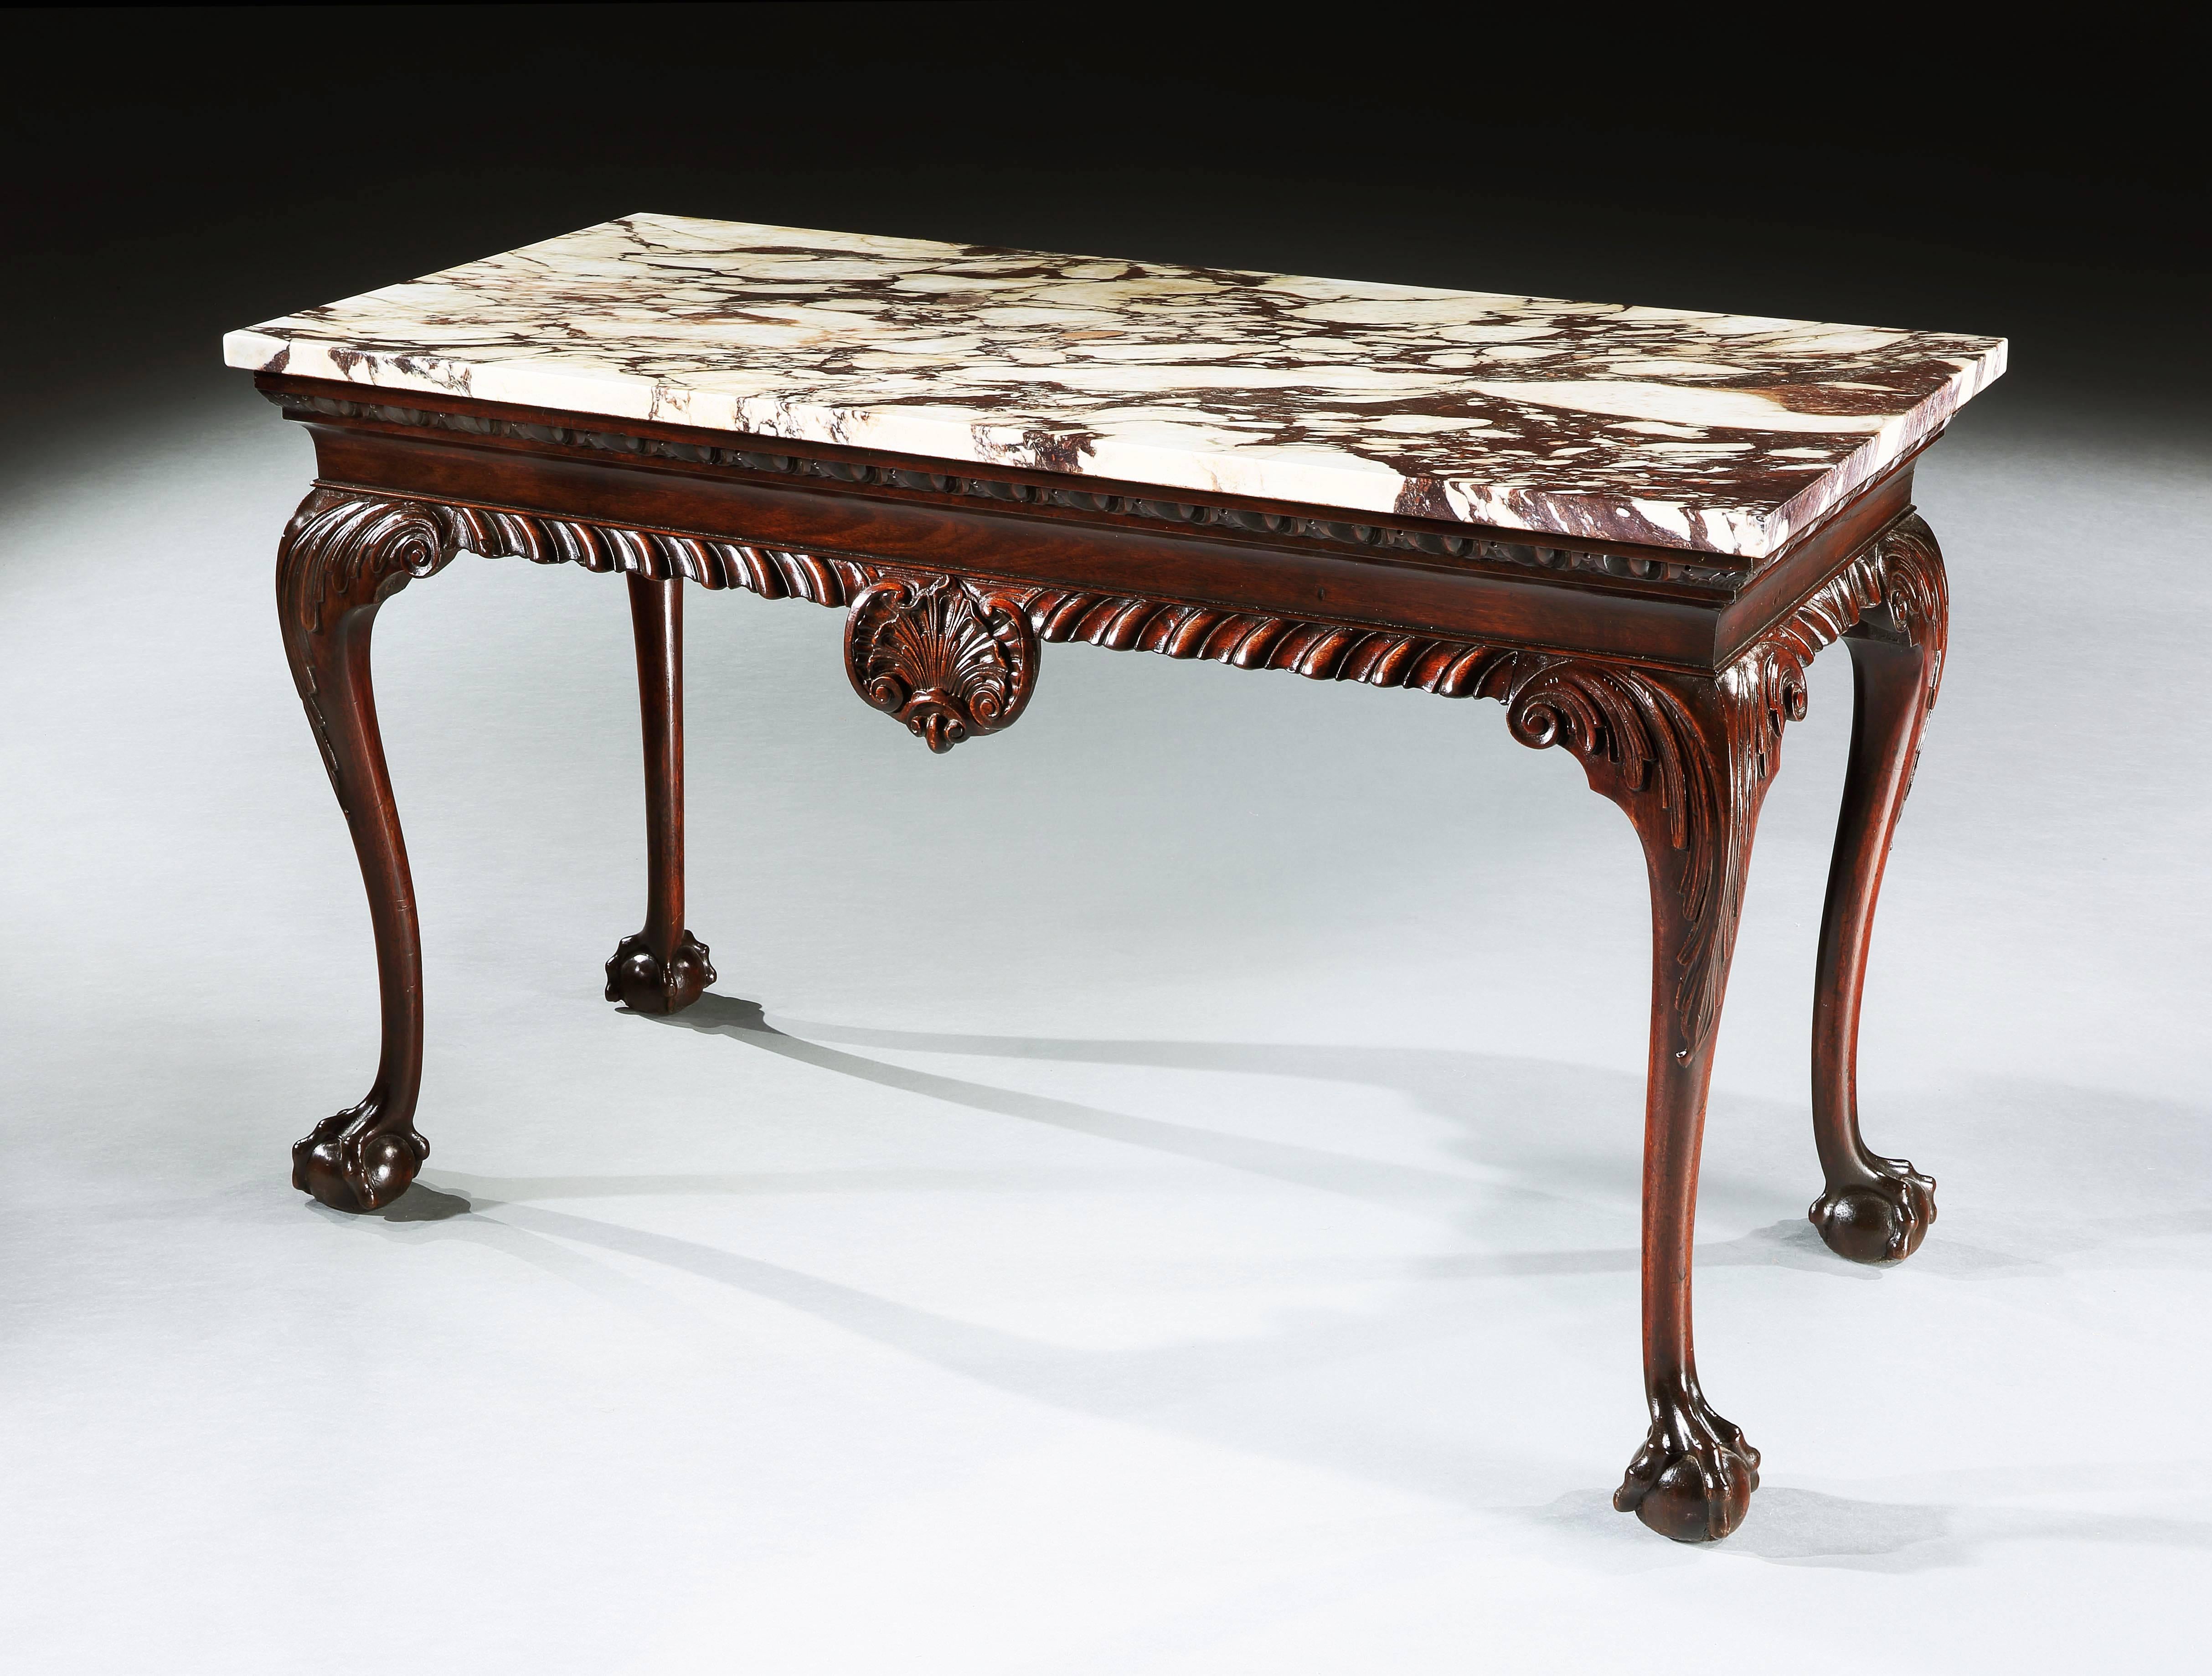 A George II side table in mahogany with a Carrara Brescia Violetta marble top above an egg and dart moulding. The frieze with a carved gadrooned edge centered by a shell and standing on cabriole legs carved with acanthus, and terminating in ball and